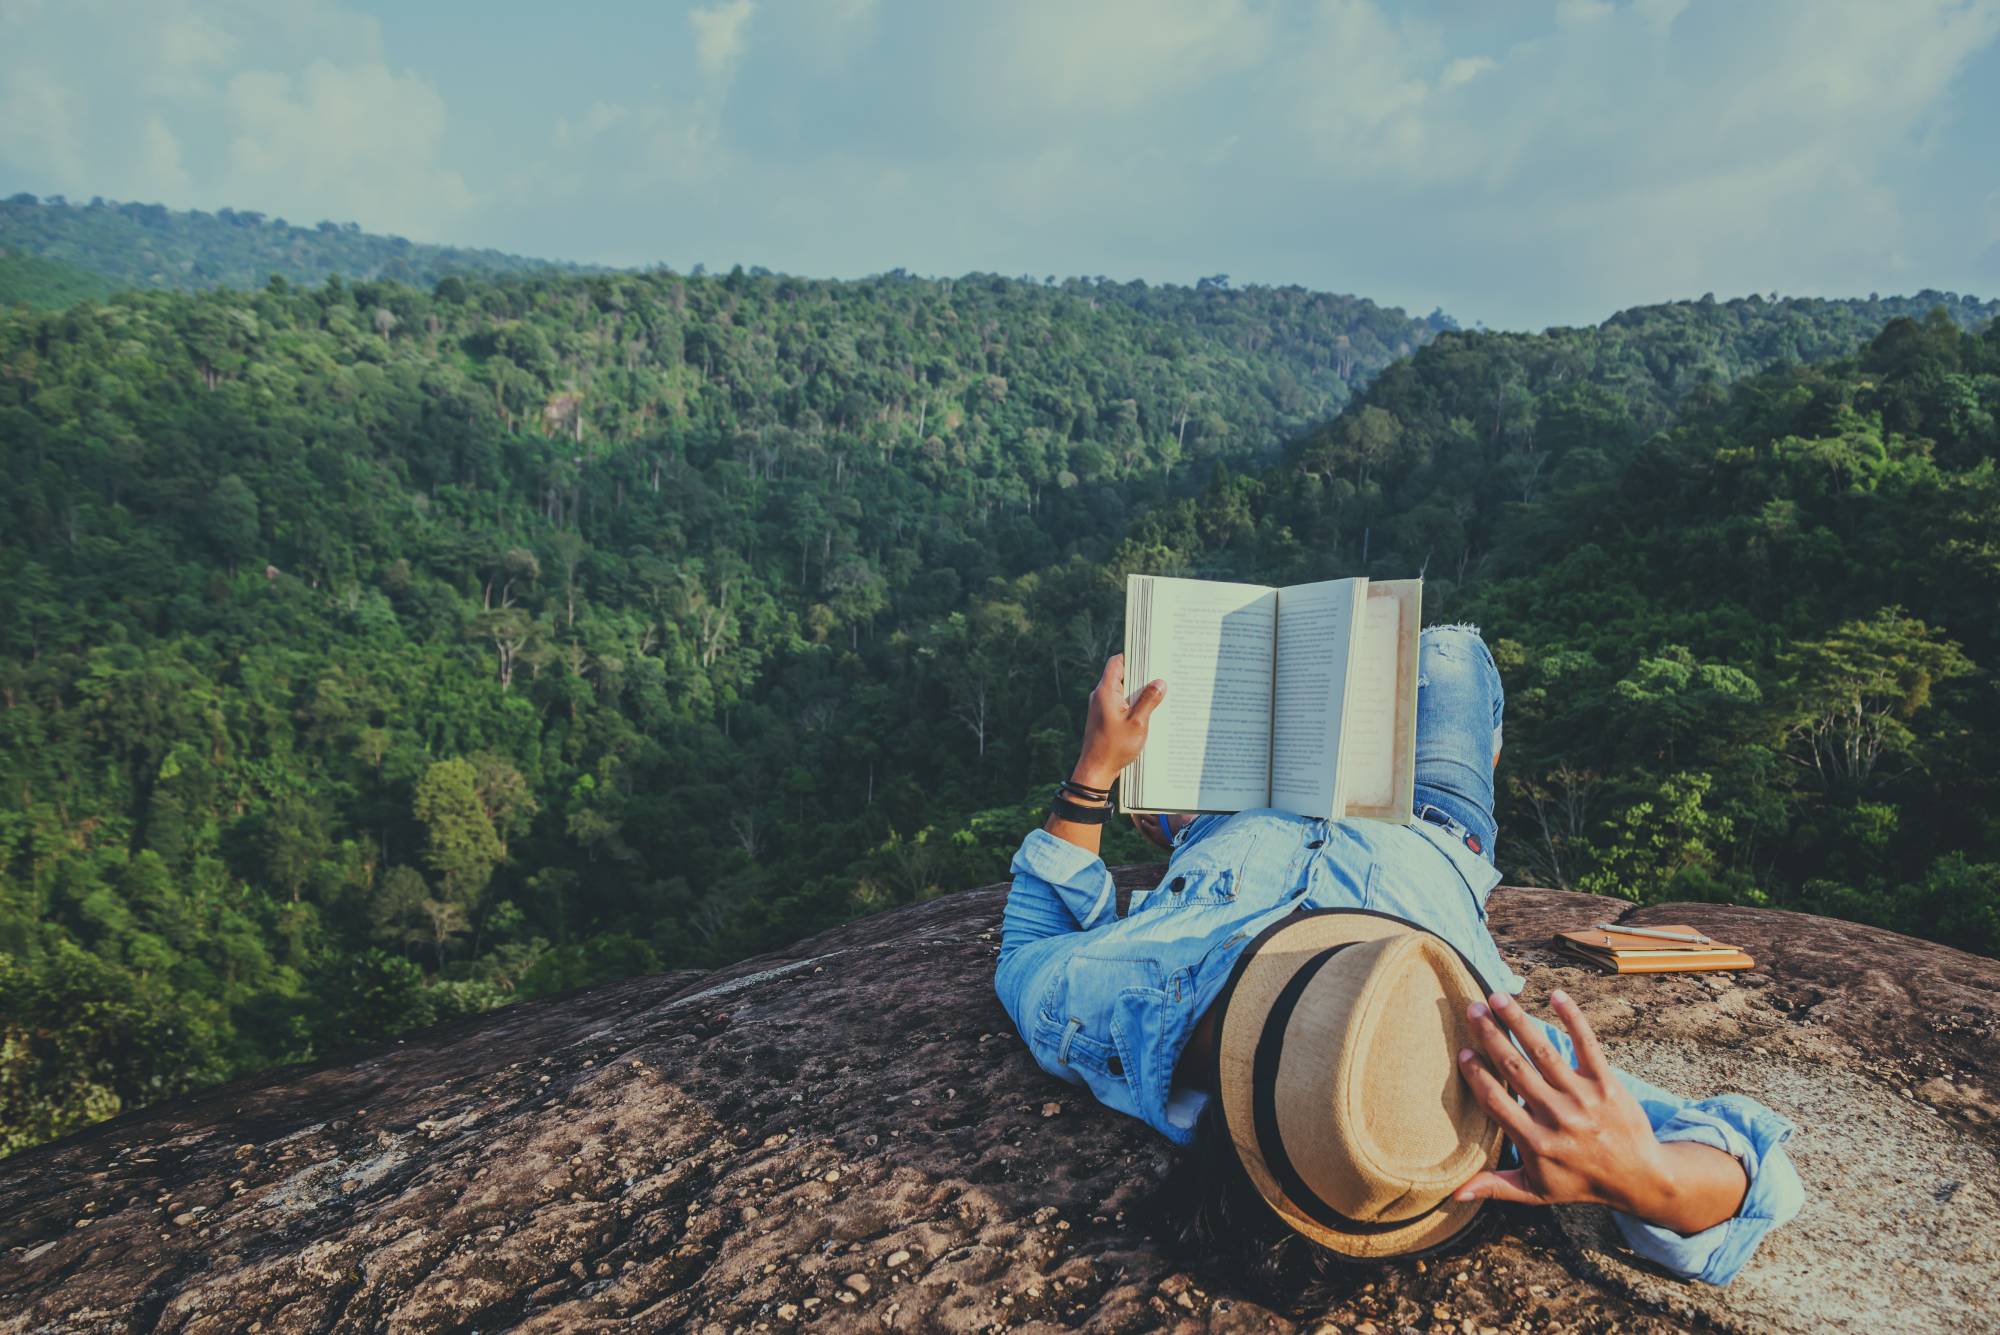 Mind travels: The best travel writing can offer escape and new perspectives on the world. | GETTY IMAGES